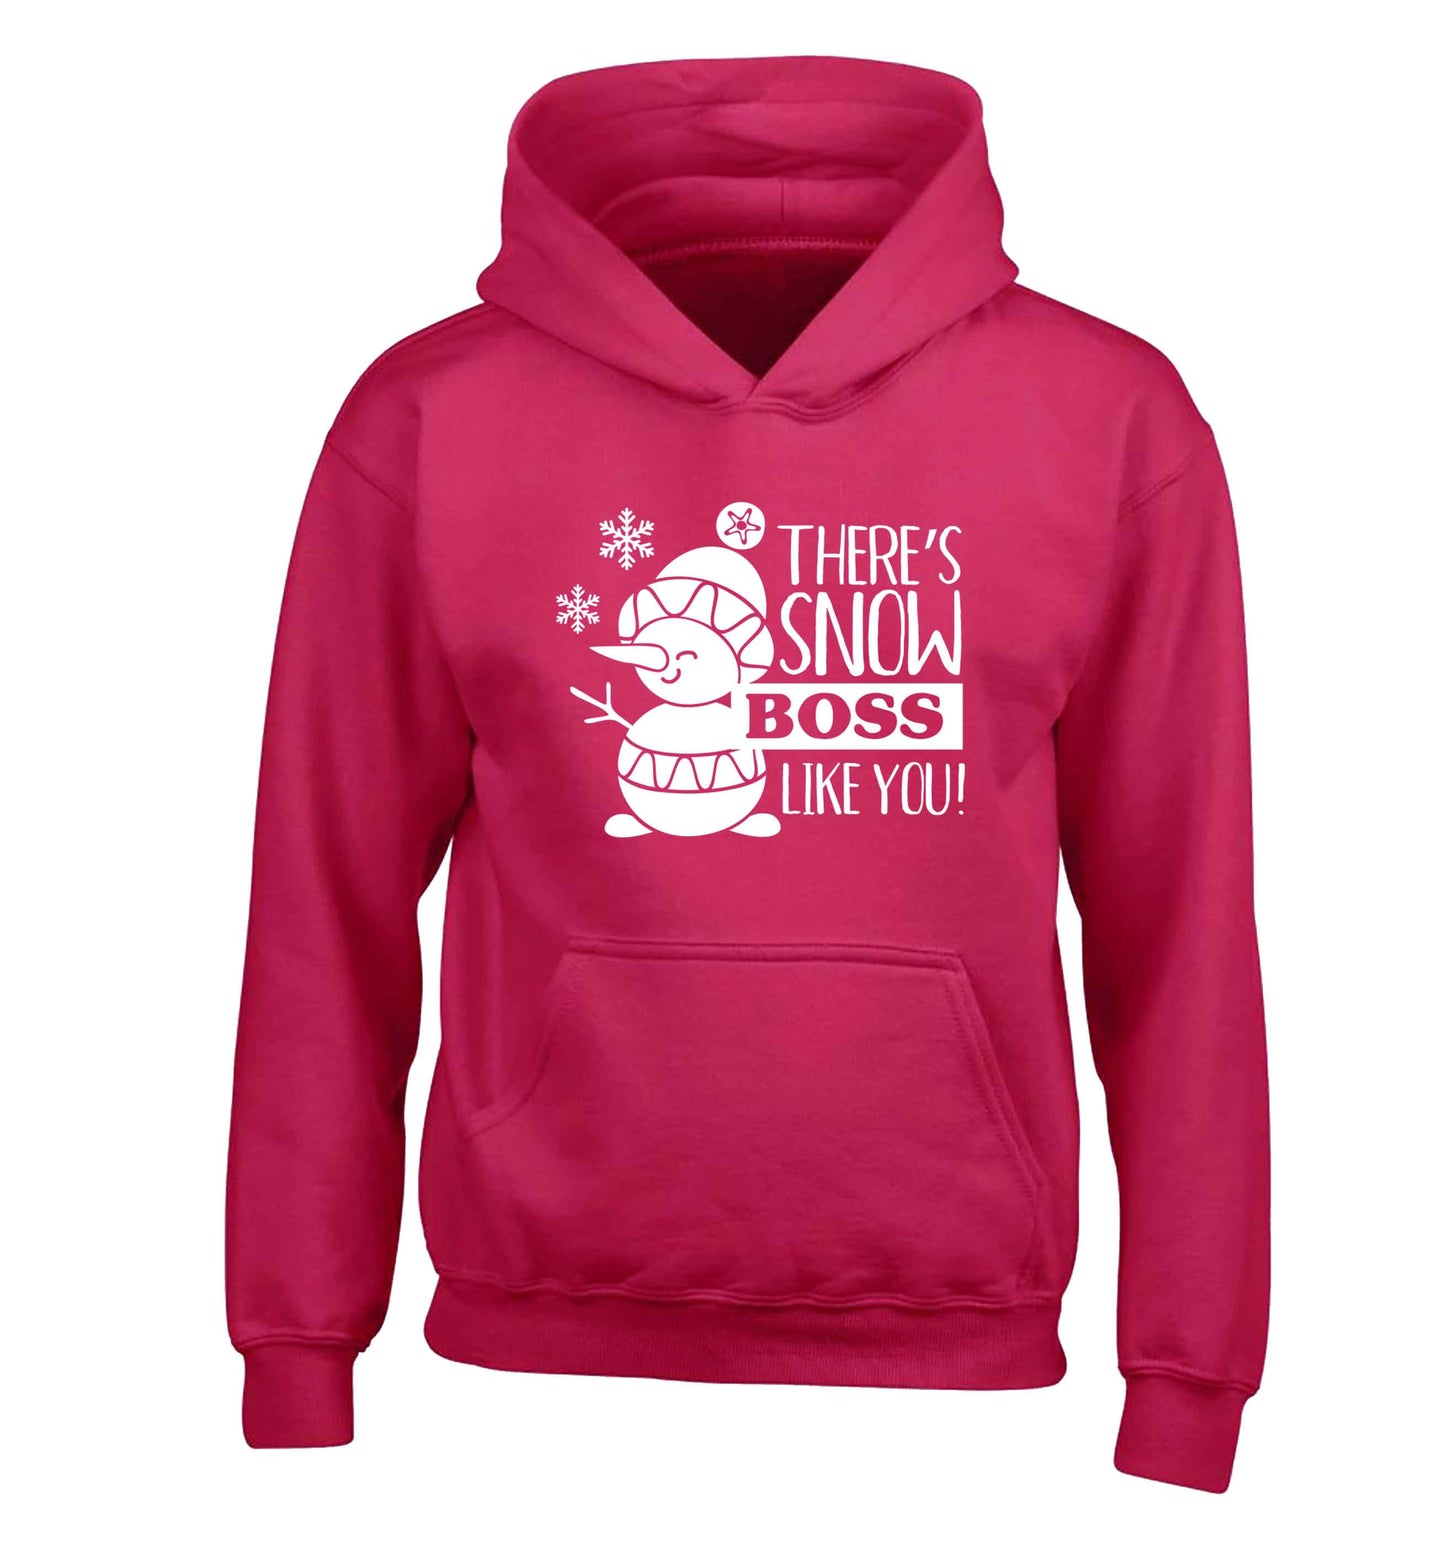 There's snow boss like you children's pink hoodie 12-13 Years